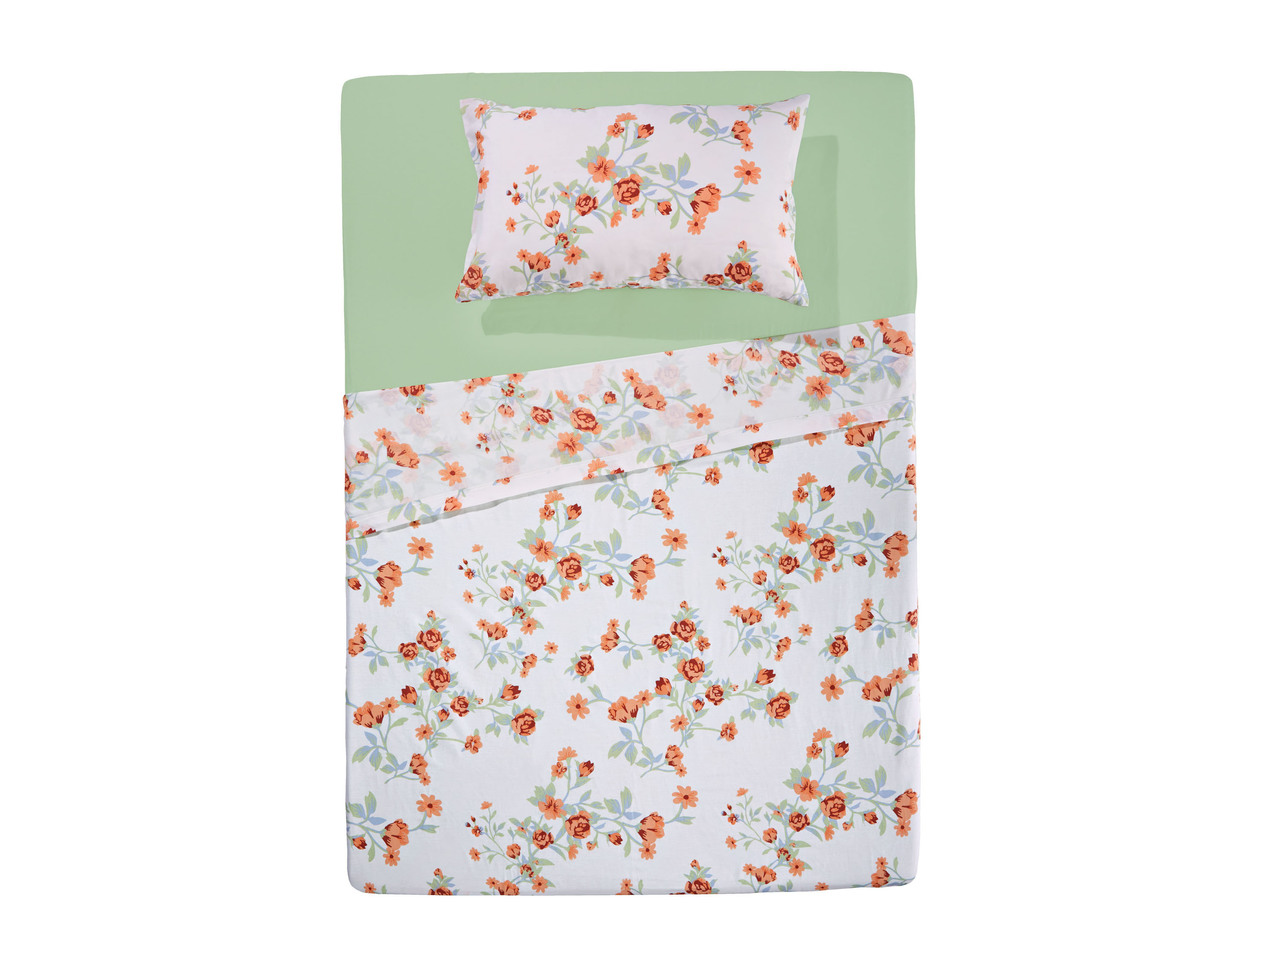 Single or One and a Half Size Bedlinen Set